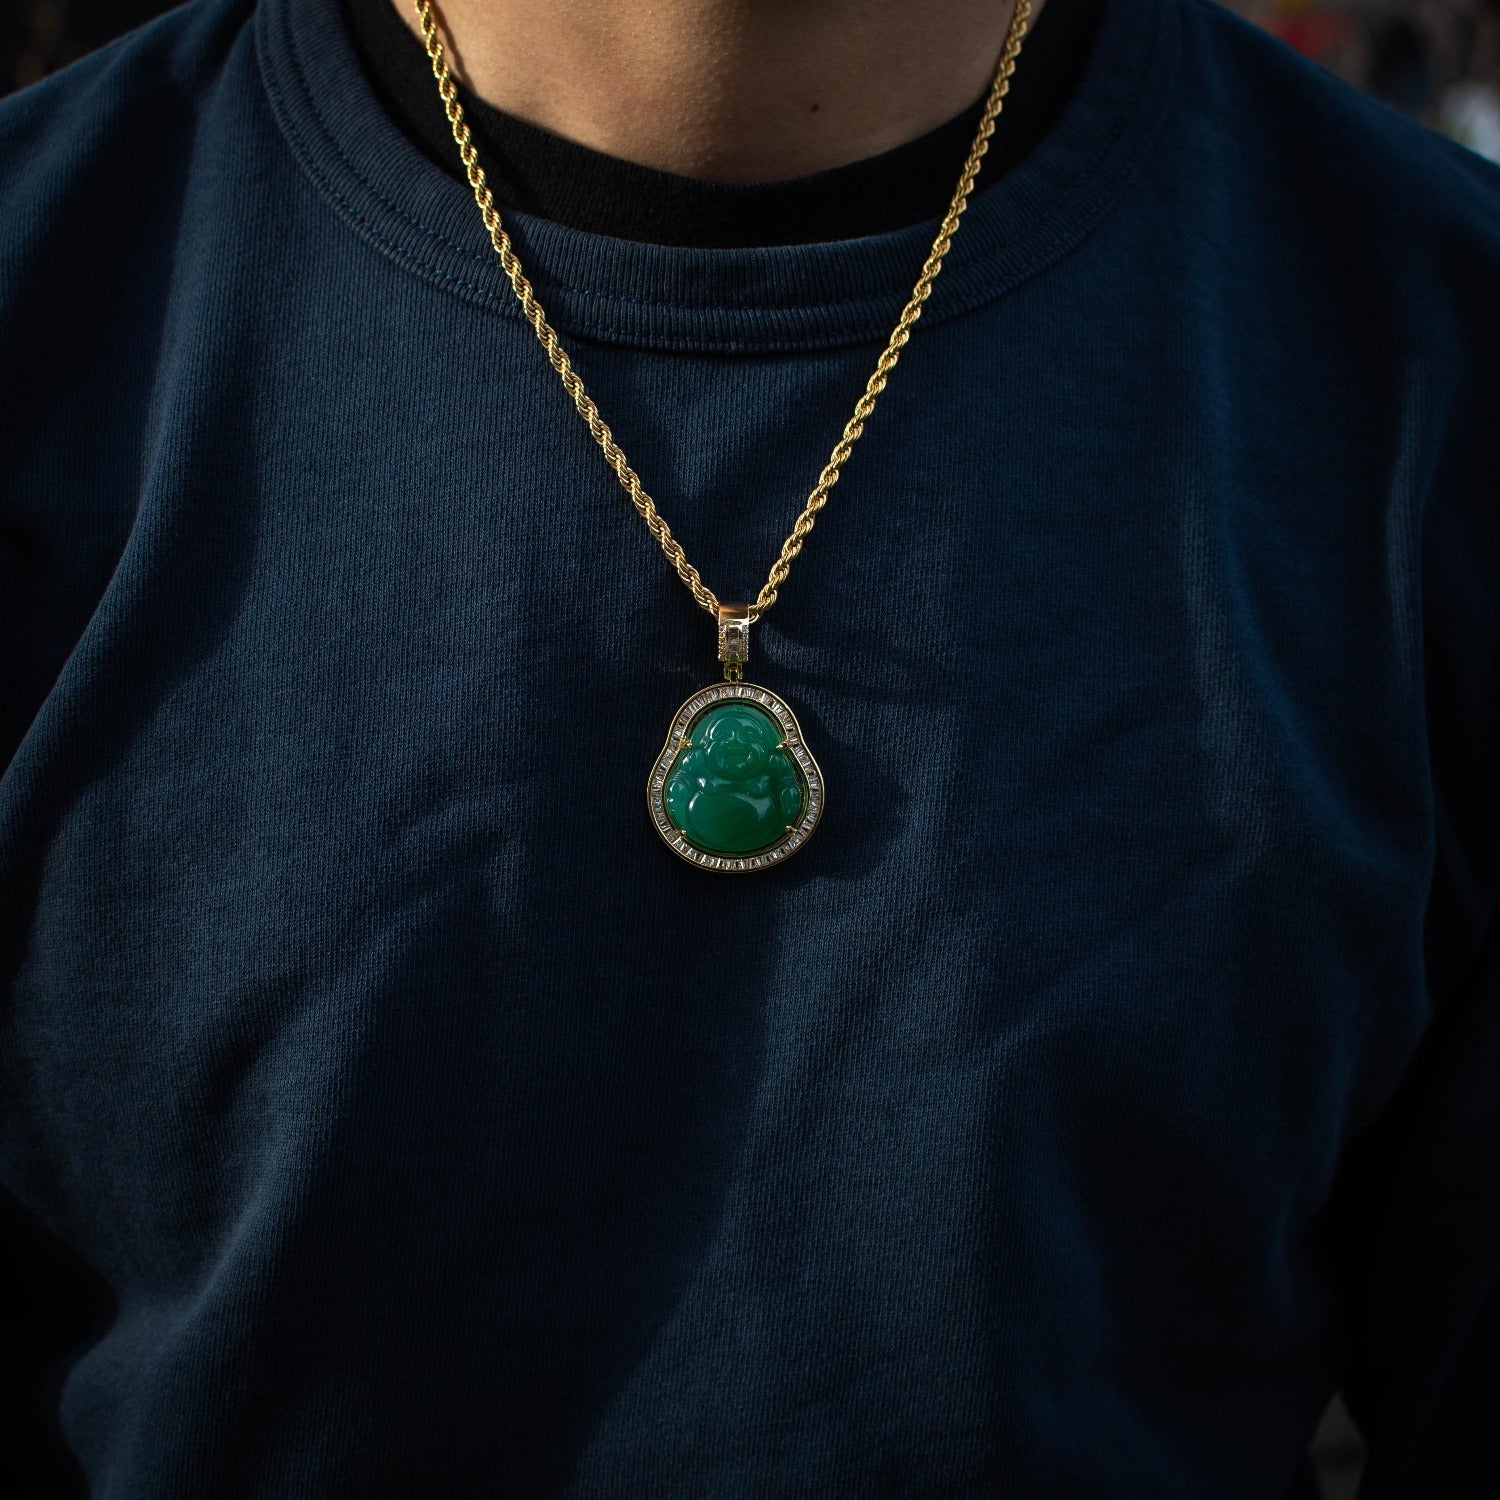 Mini Jade Buddha Necklace - Ivy Luxe Shop